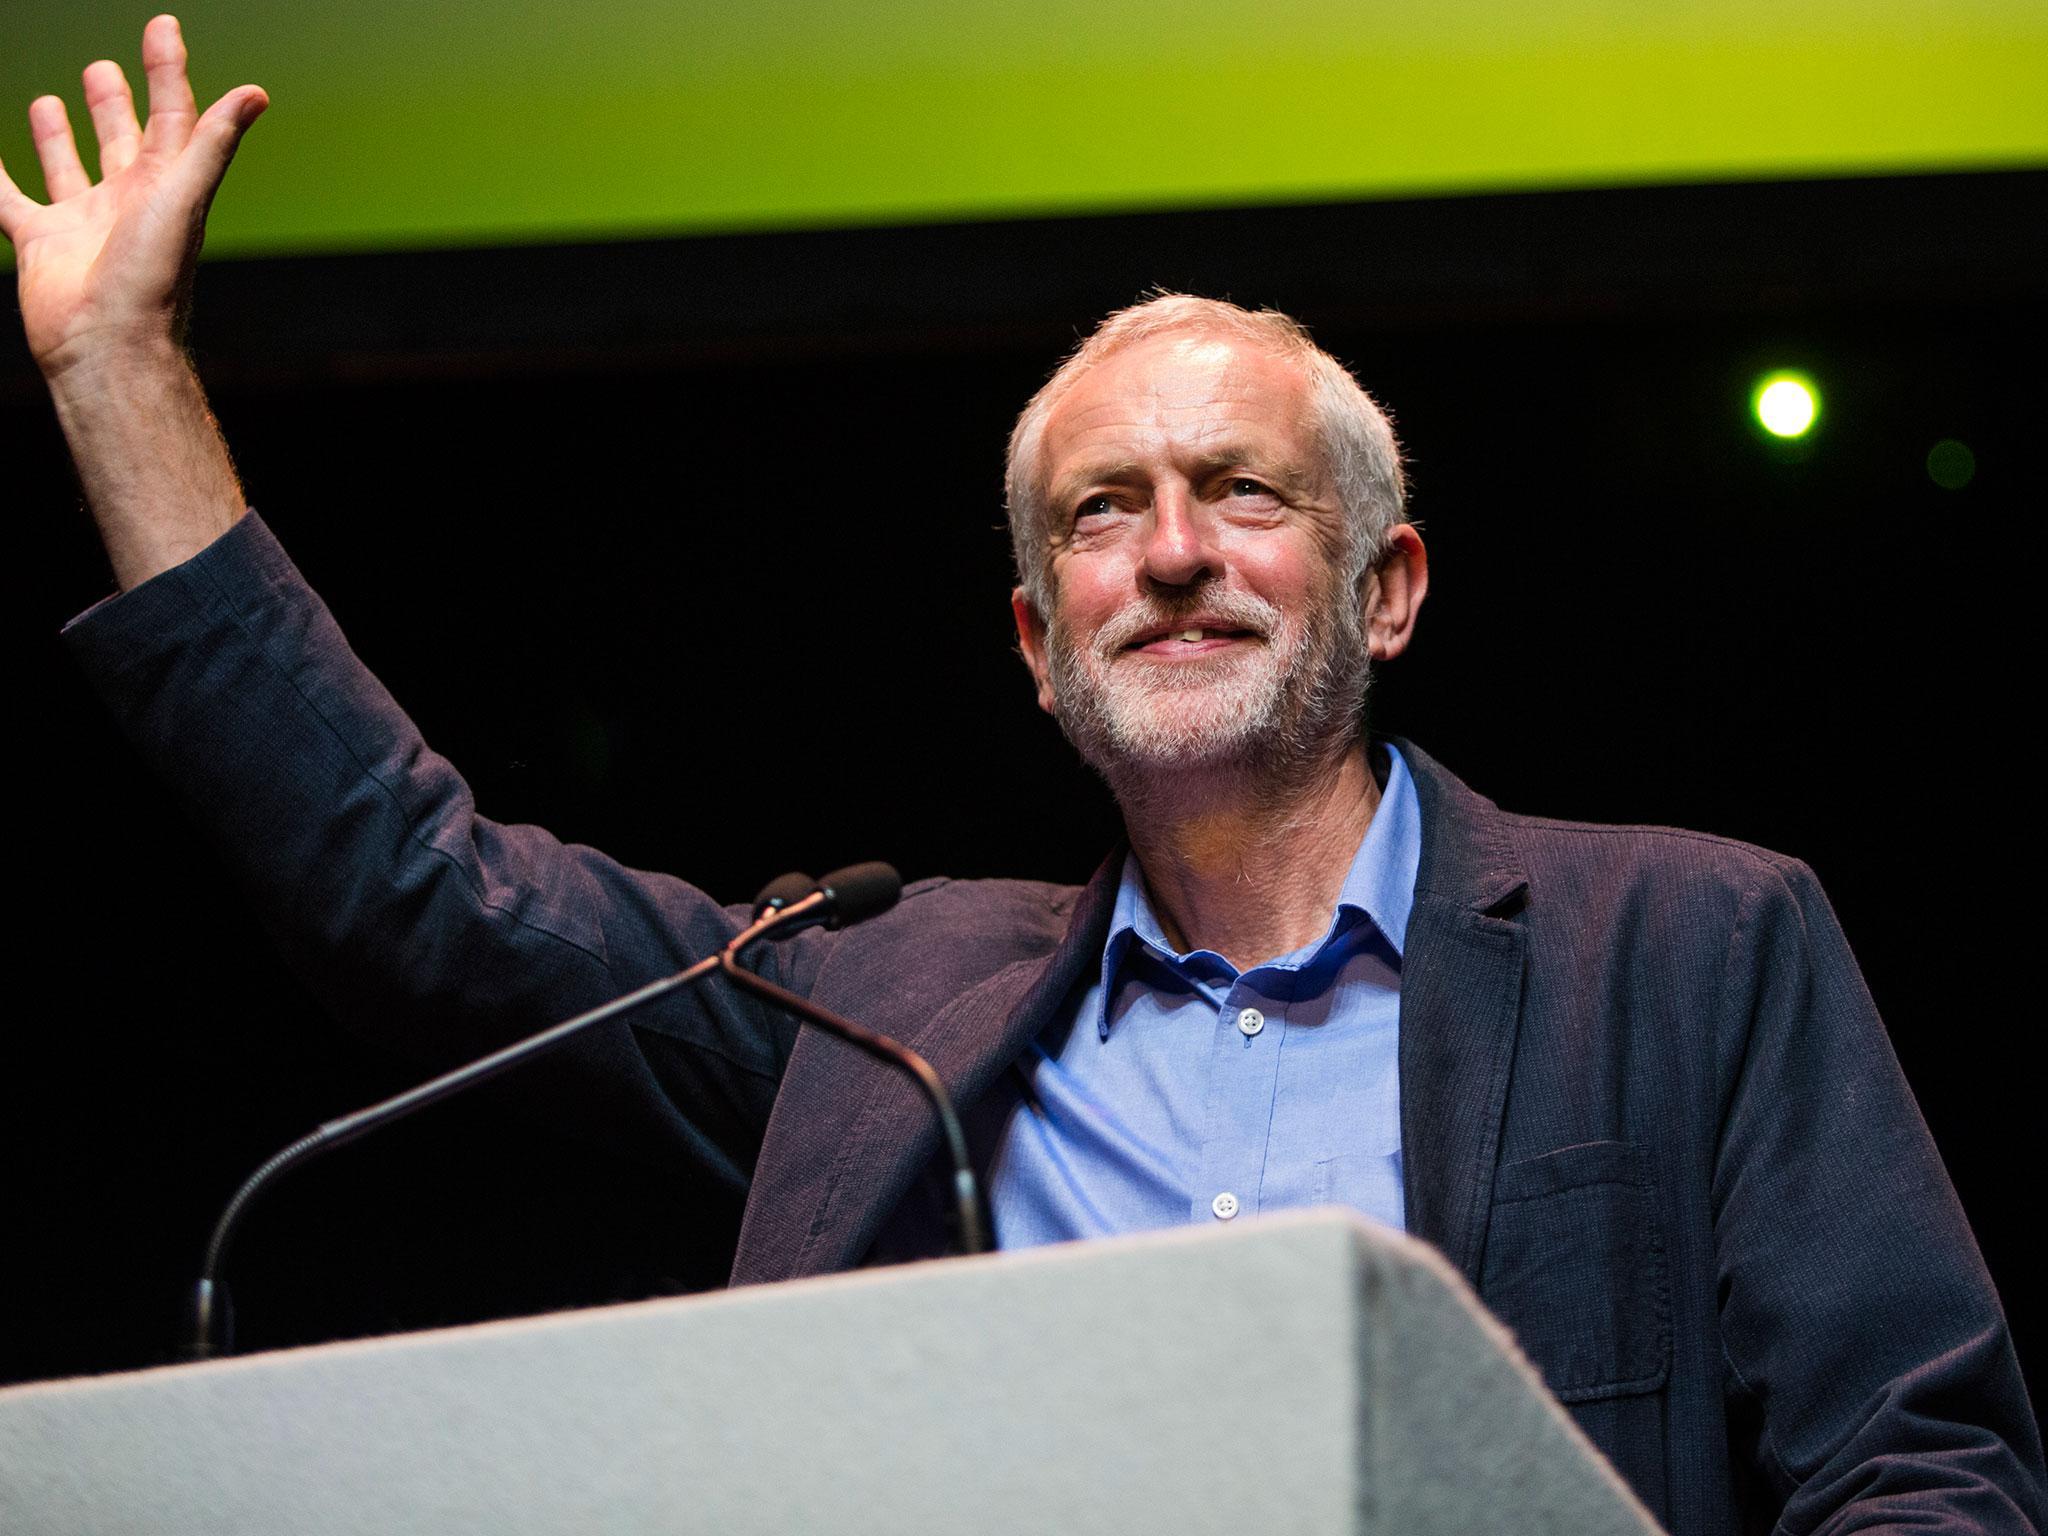 Jeremy Corbyn addresses supporters at his leadership rally at The Lowry Theatre, Salford, last week